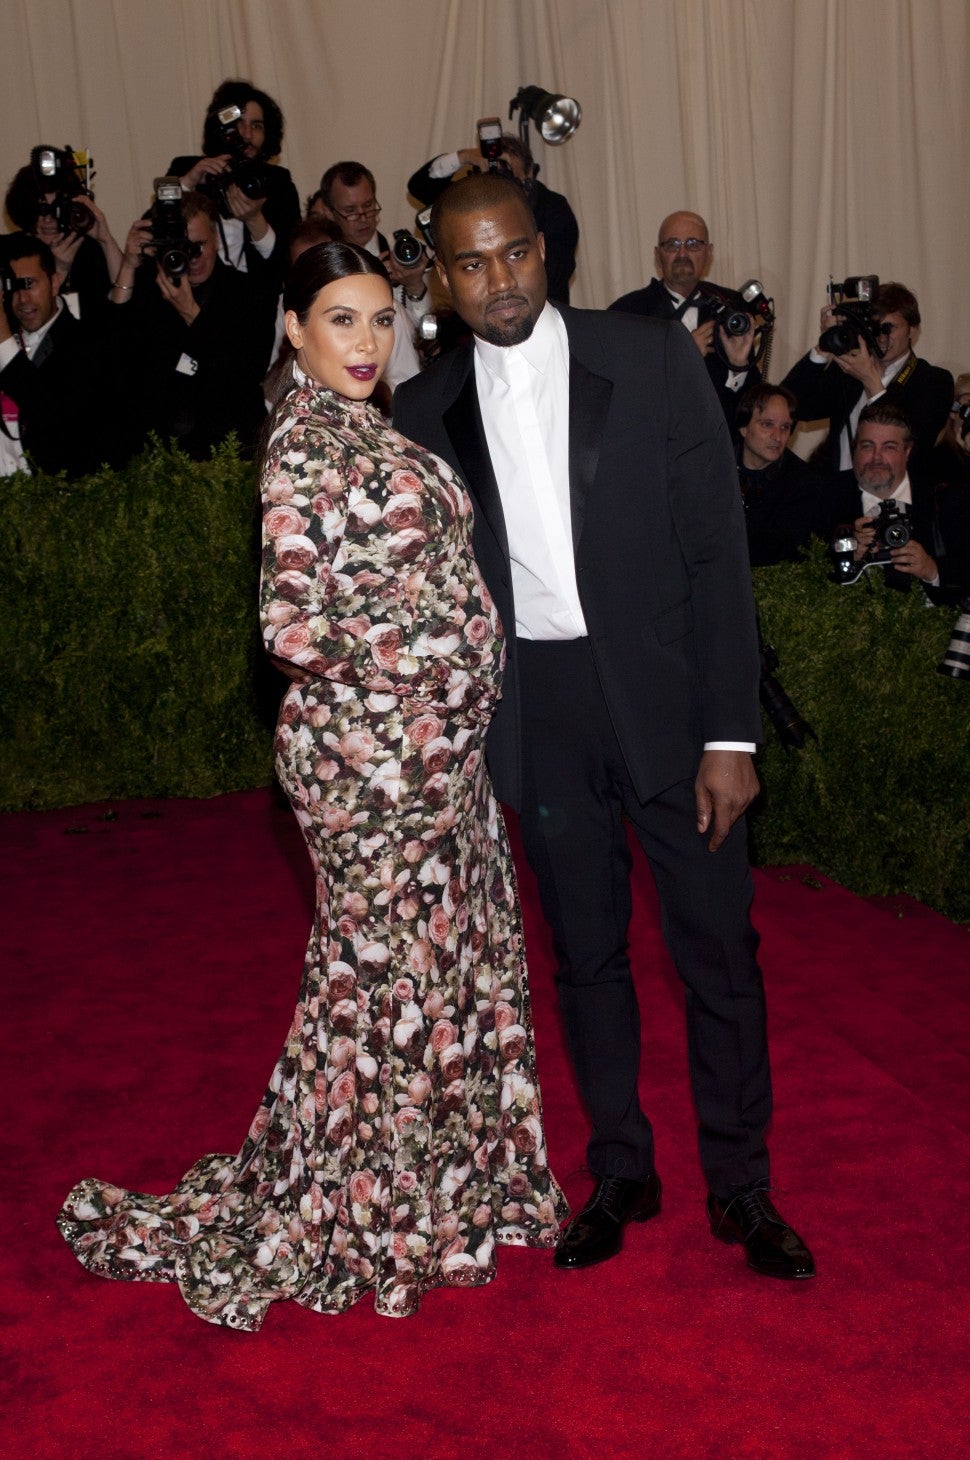 Kanye West and Kim Kardashian attend the Costume Institute Gala for the 'PUNK: Chaos to Couture' exhibition at the Metropolitan Museum of Art in New York City.